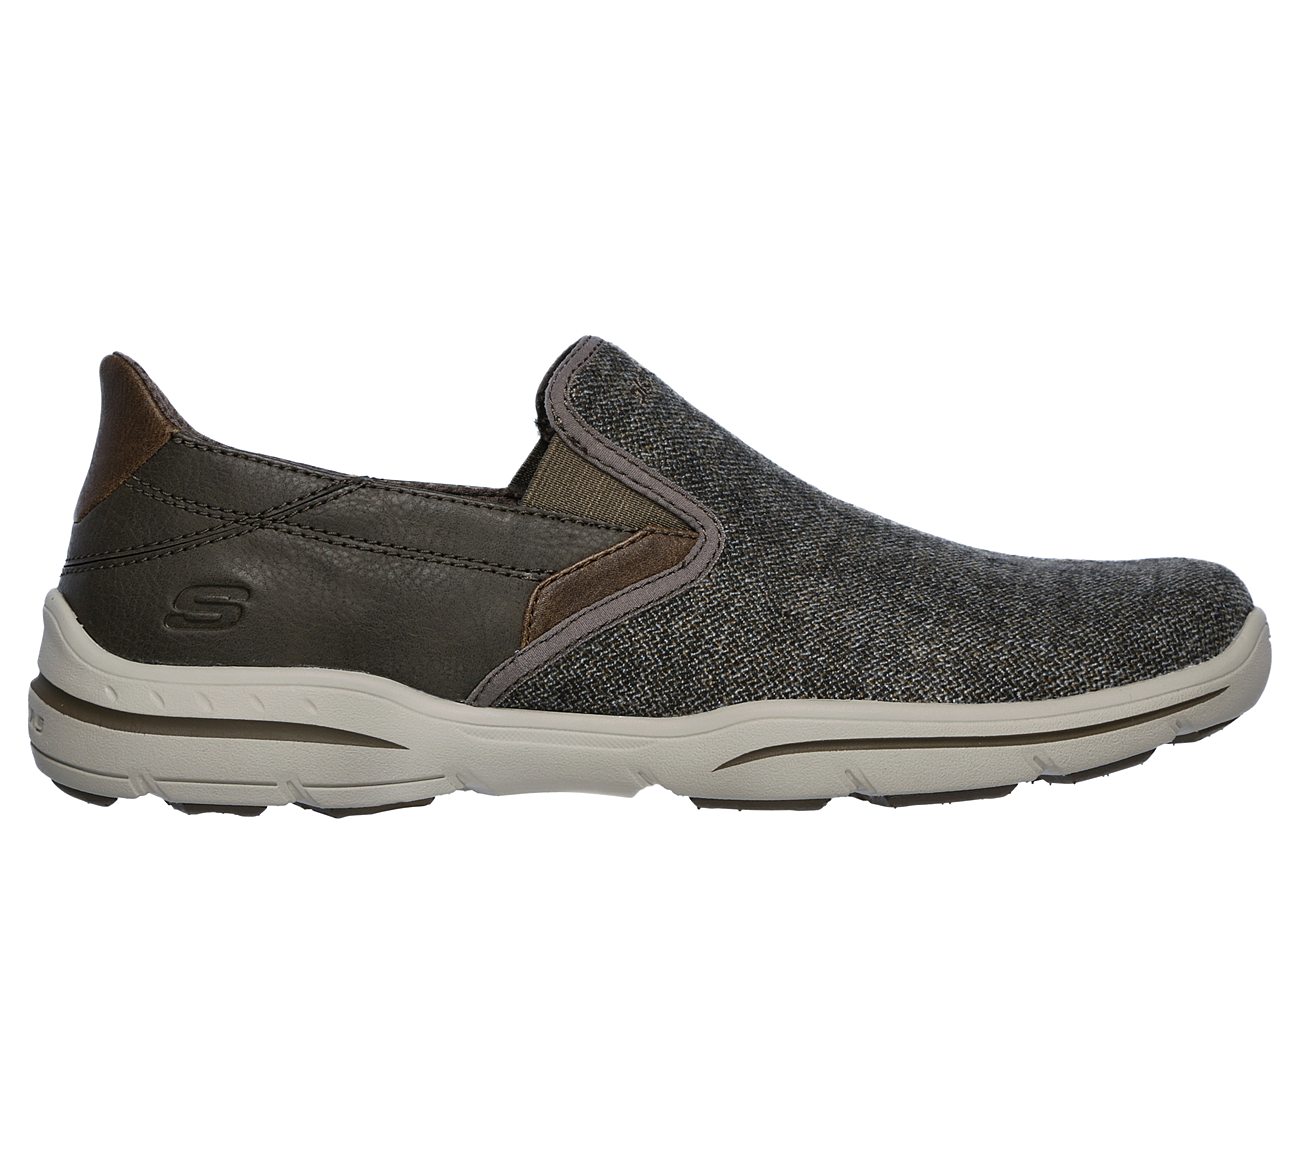 Trefton SKECHERS Relaxed Fit Shoes